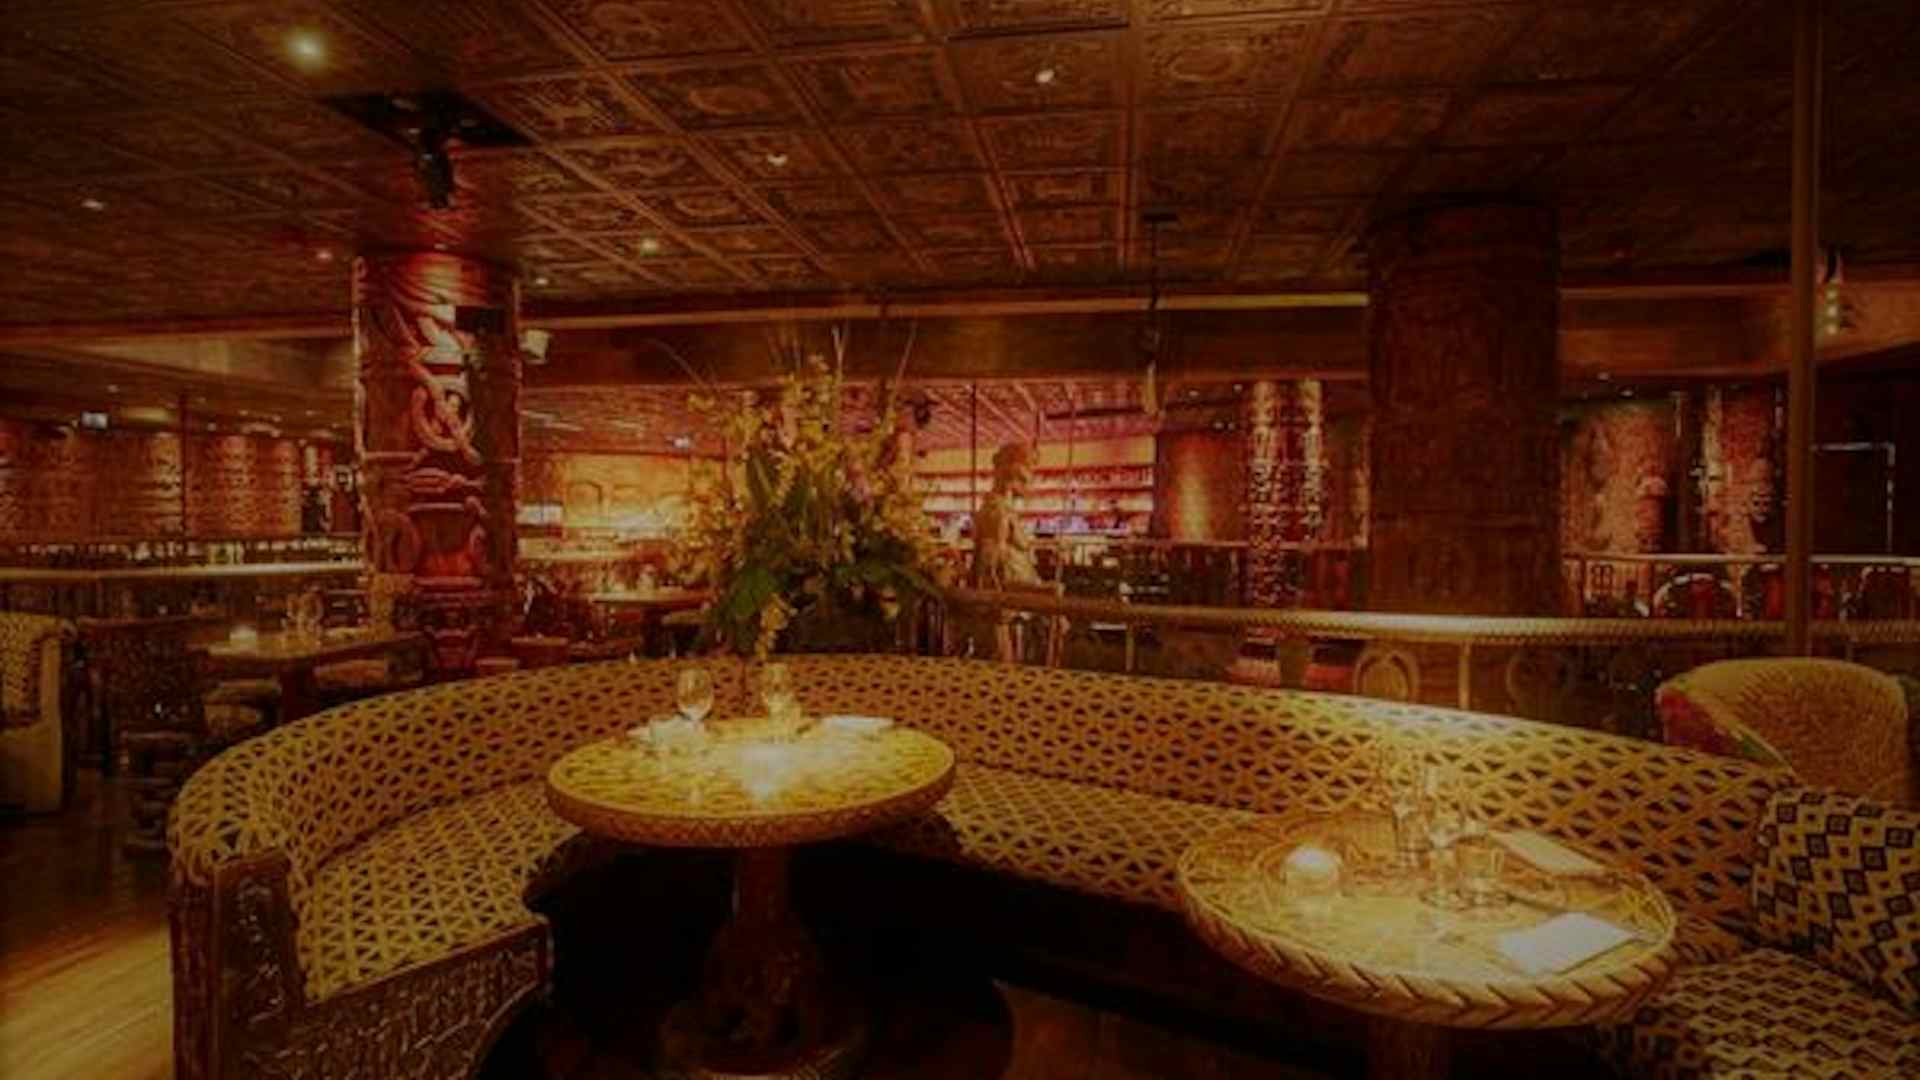 Shaka Zulu: Paying Homage to Africa – and to Formidable Events